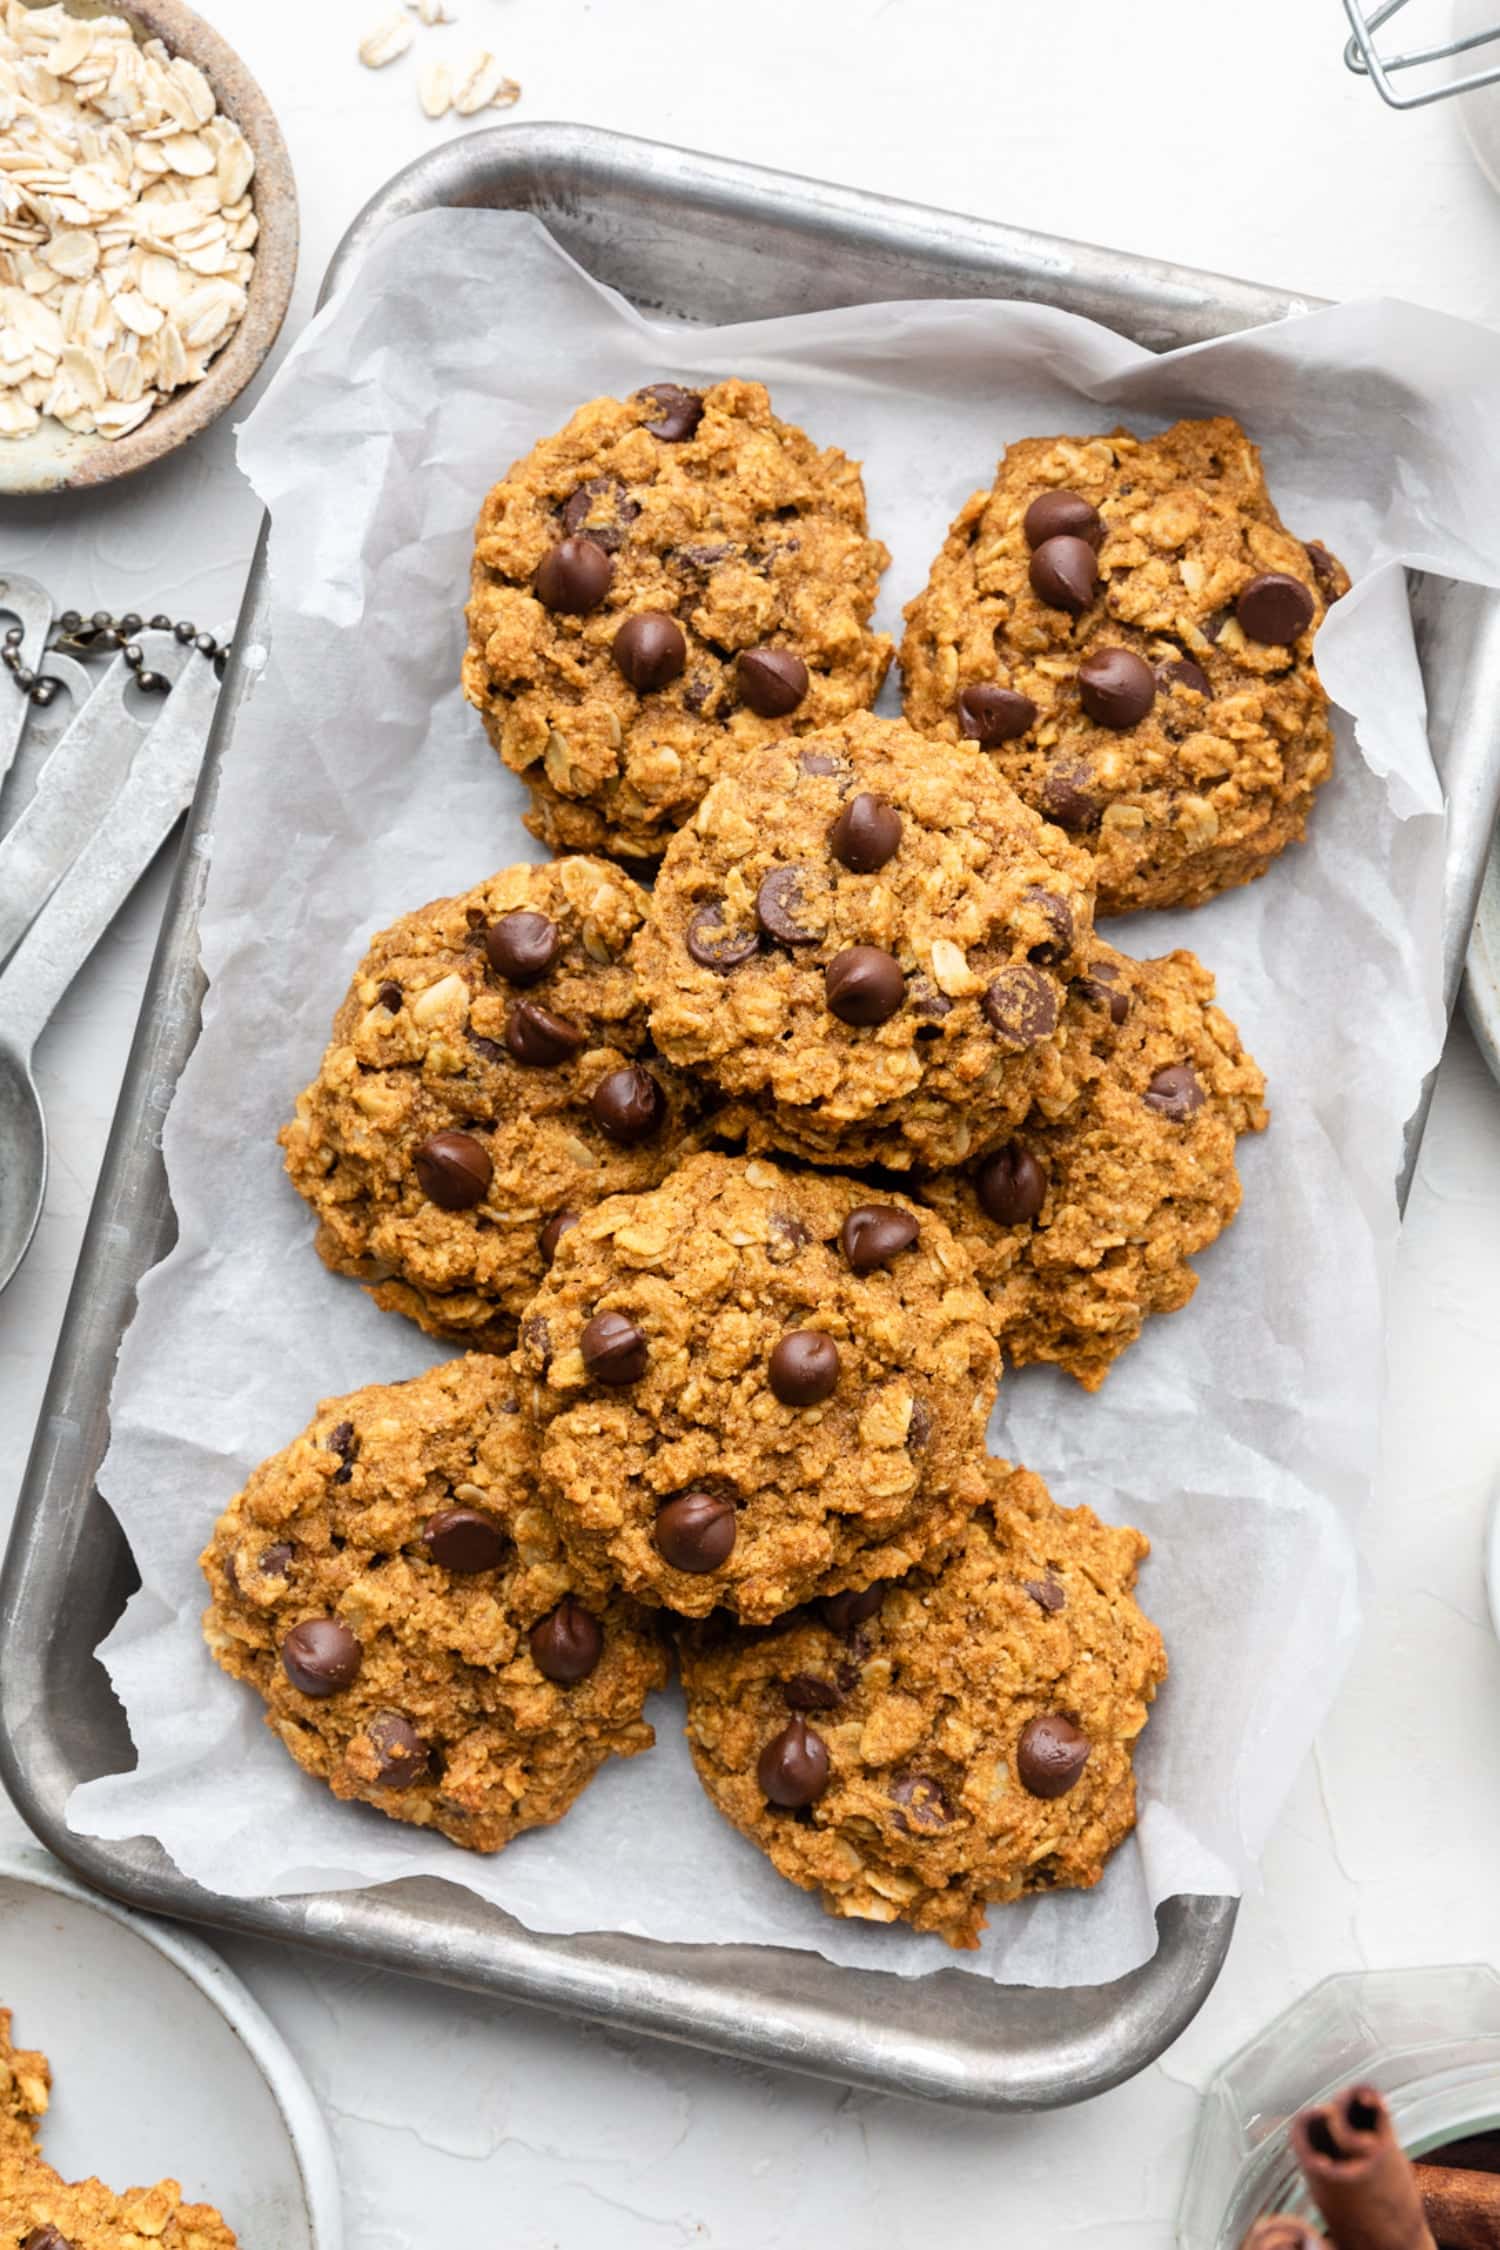 A large tray with pumpkin oatmeal cookies baked and ready to eat.